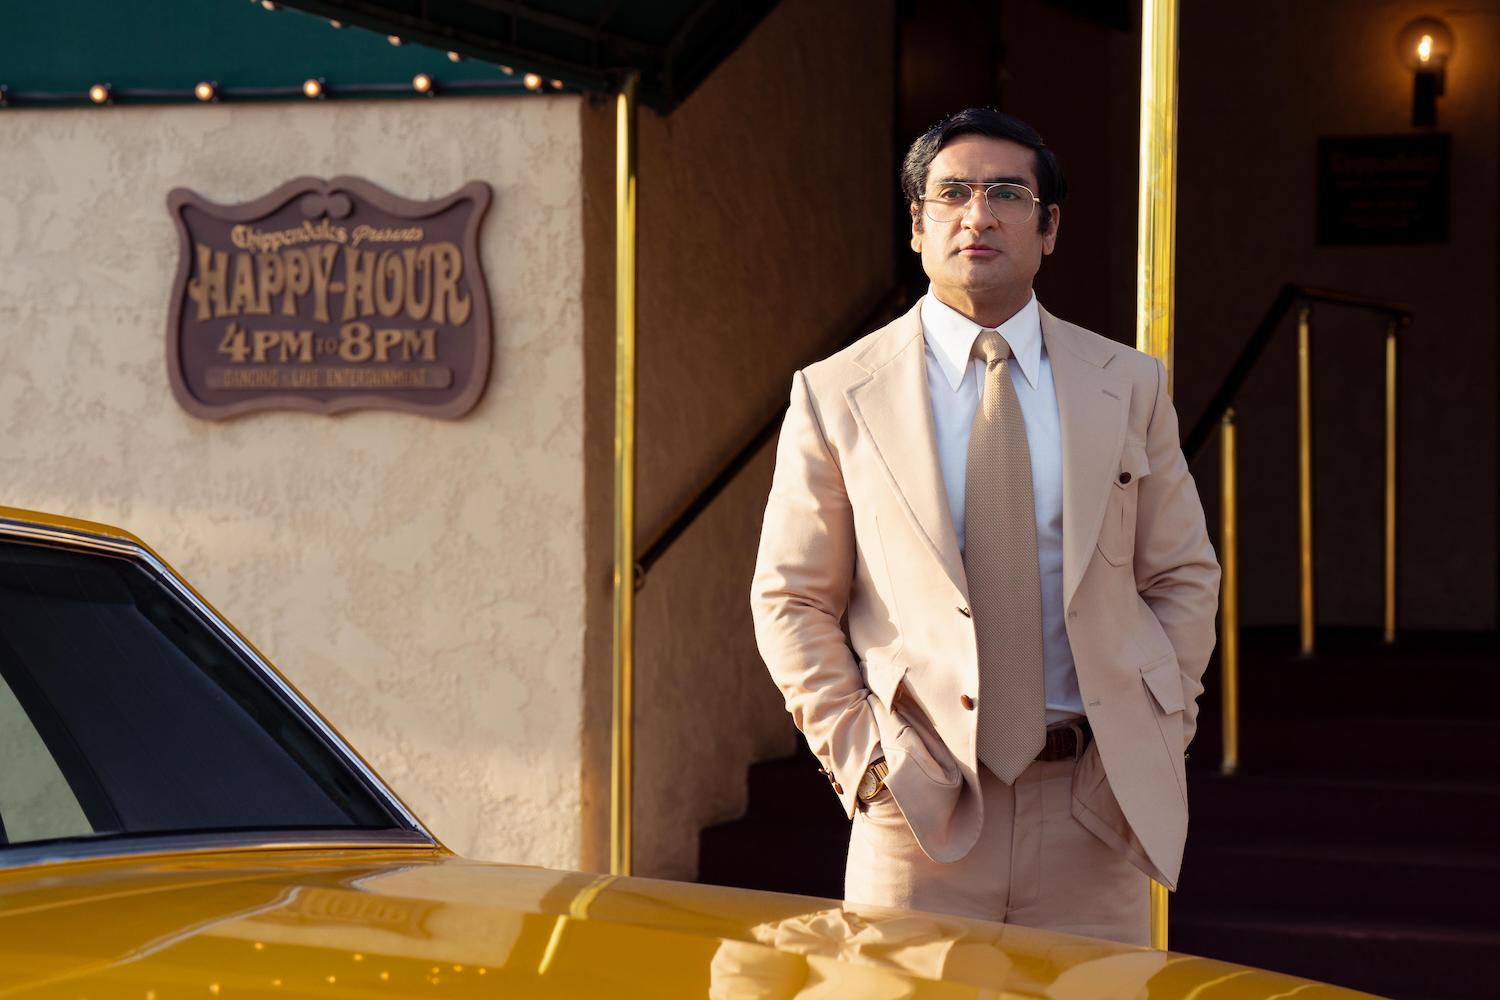 'Welcome to Chippendales' Steve Banerjee played by Kumail Nanjiani, standing in a beige suit beside a taxi in a prodution still.